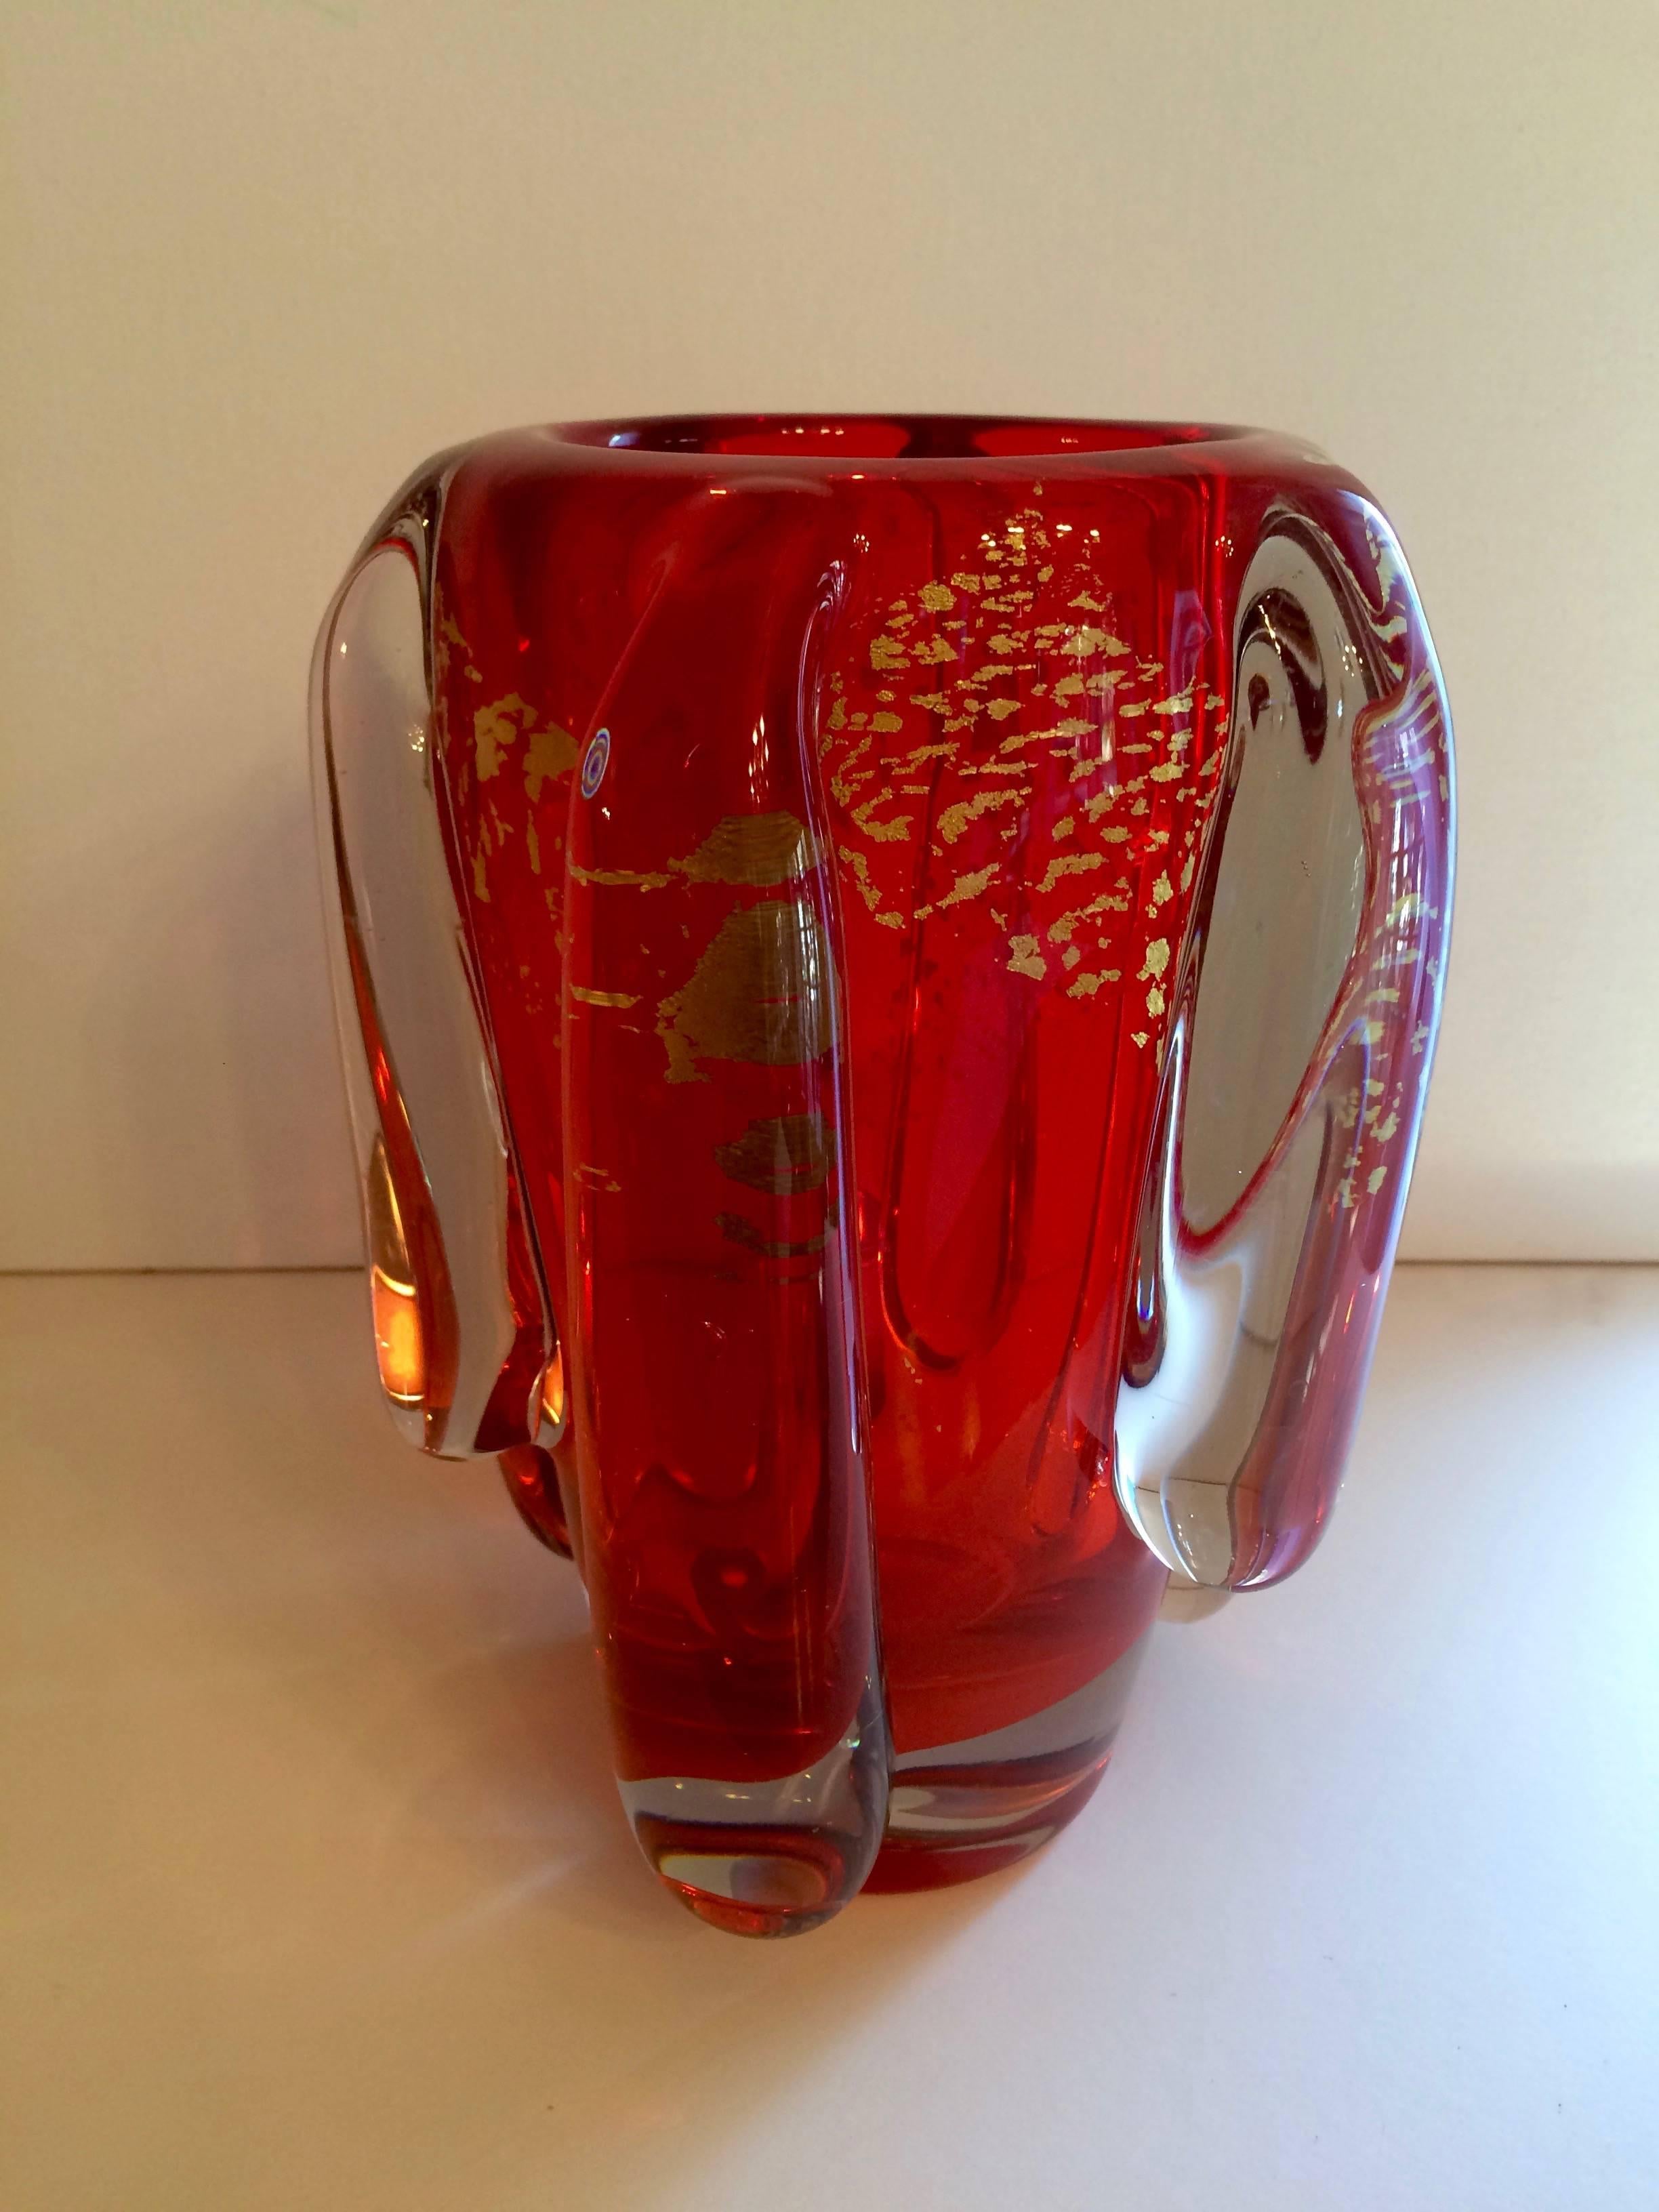 Stunning and brilliant Red Ercole Barovier Murano vase with 24-karat gold flake This is an exquisite and very heavy piece, lovely filled with flowers or makes a statement standing alone.